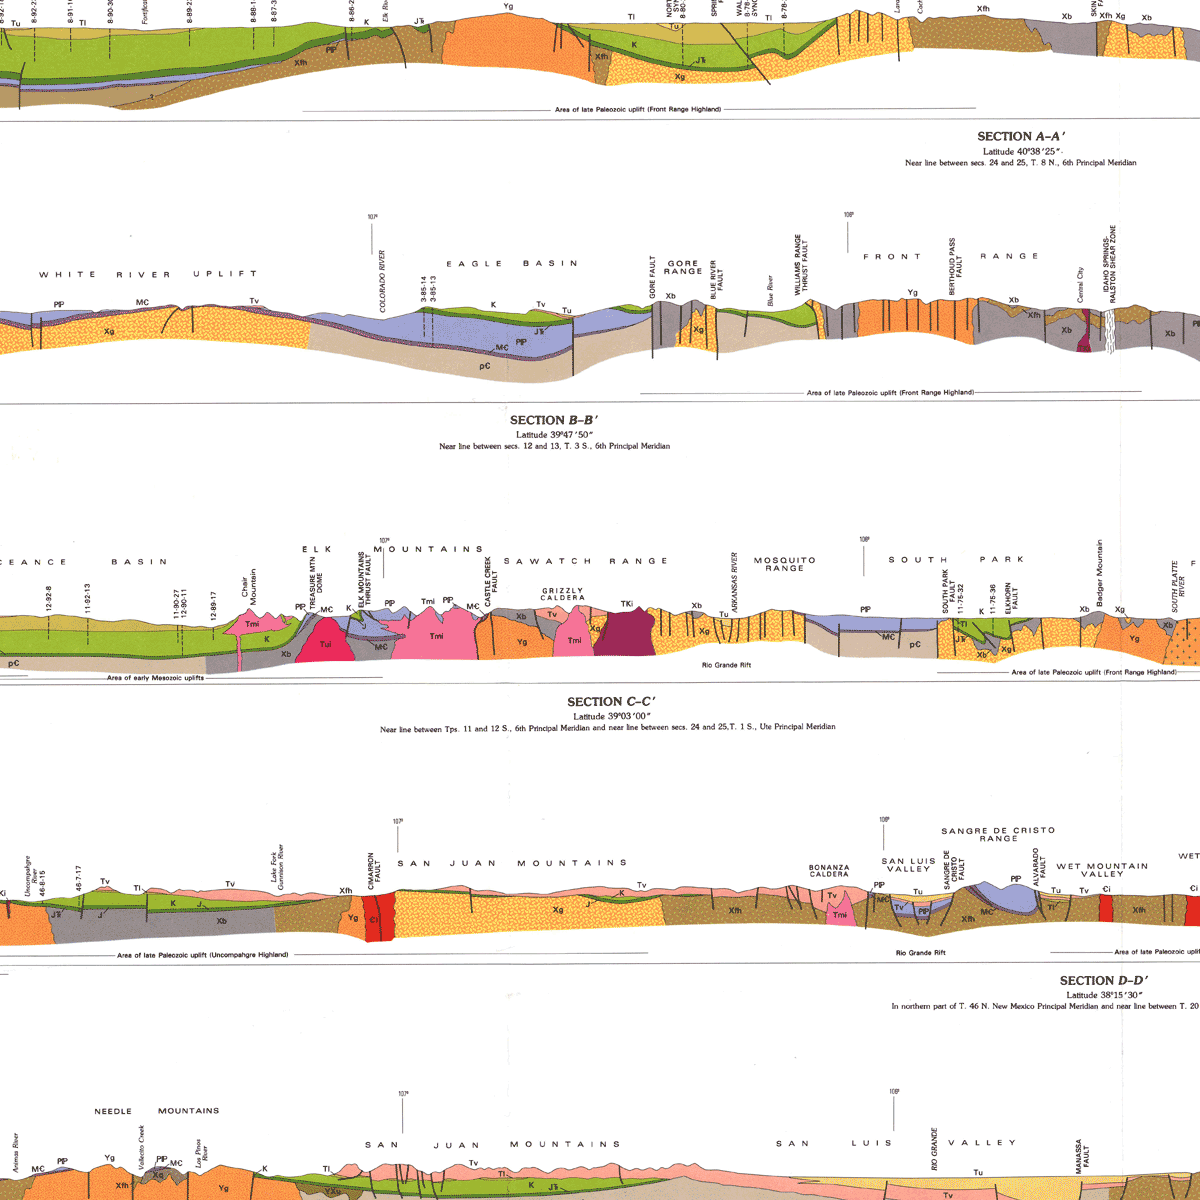 Geological map of the M. Acuto and M. Tezio areas showing the